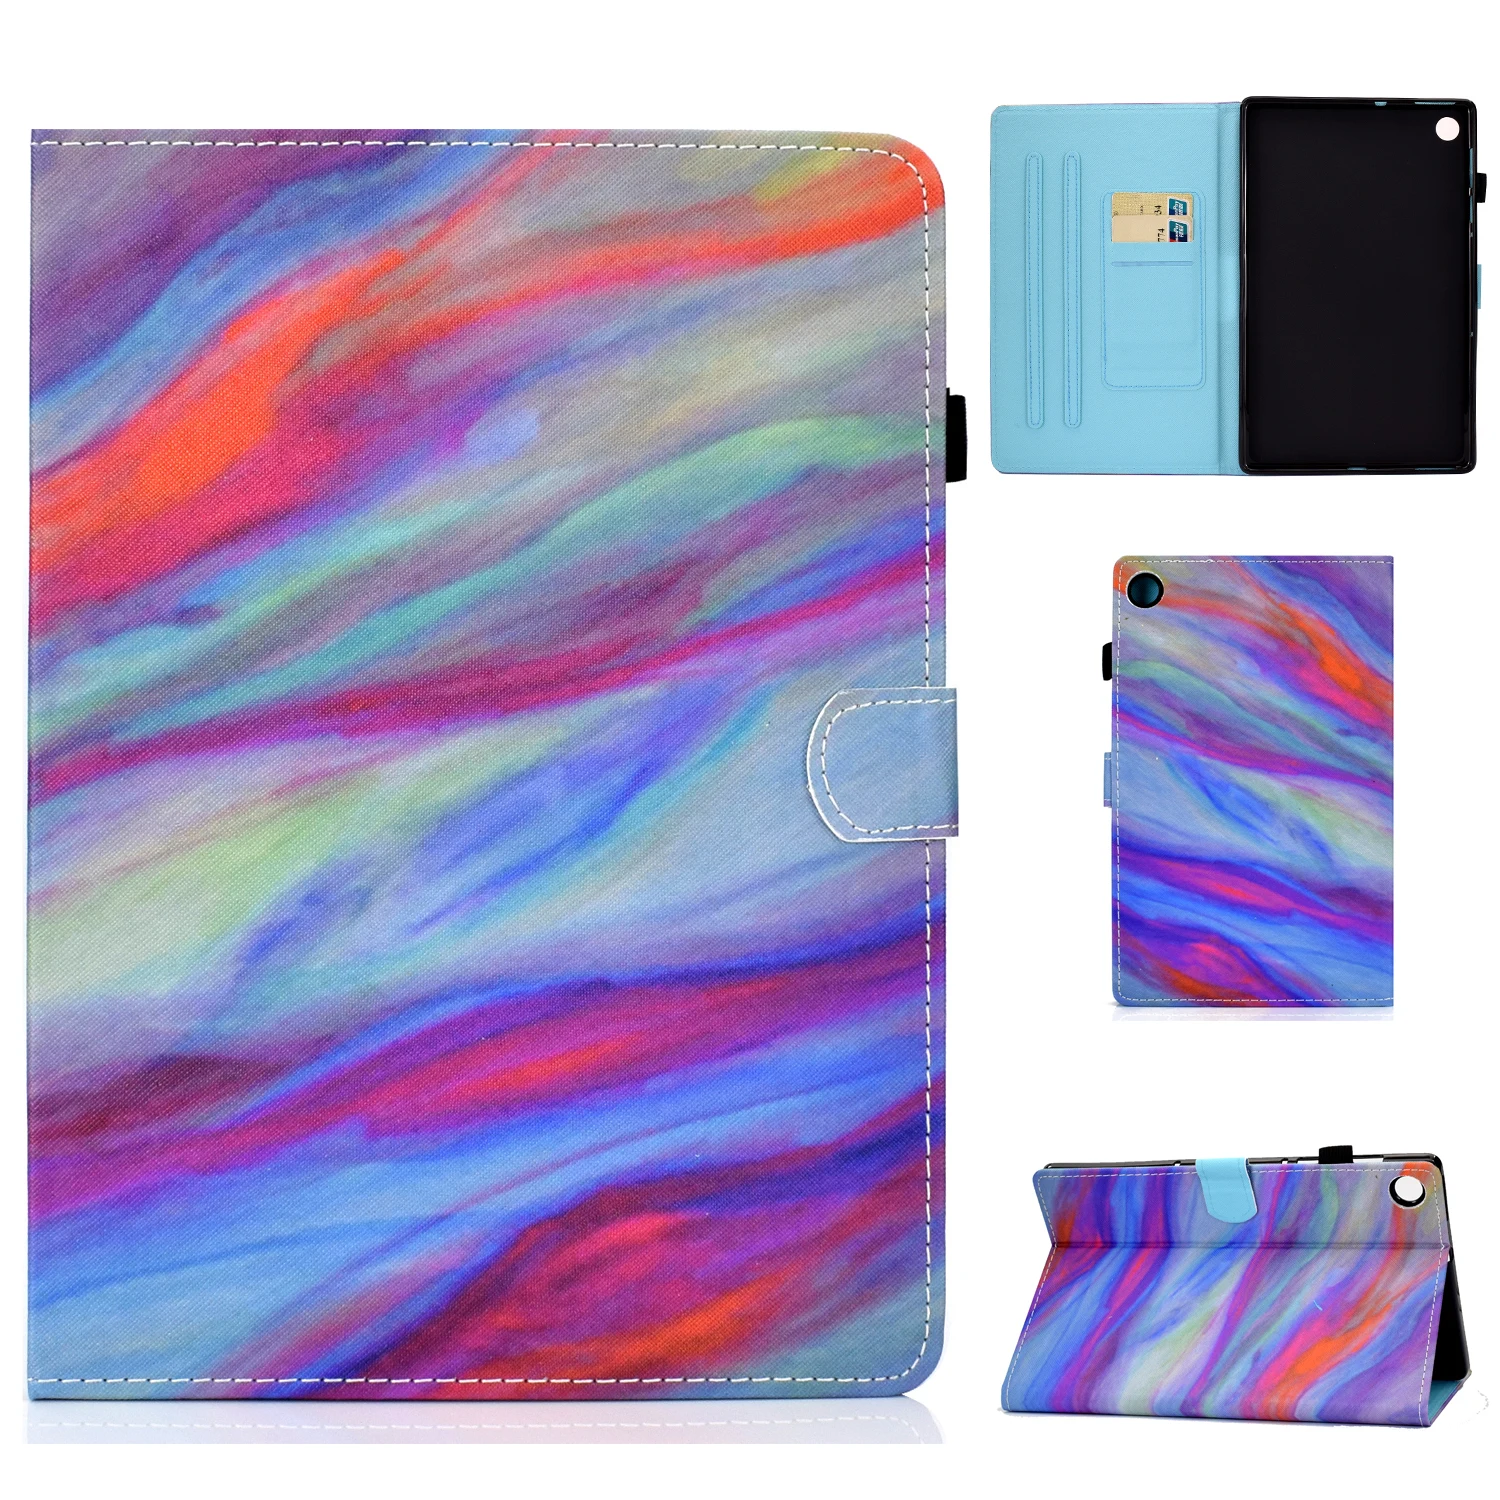 

Cartootn PU Leather Tablet Case for Huawei MatePad SE 10.4 inch AGS5-L09 AGS5-W09 with Flip Stand Casing Cover Colorful Marble